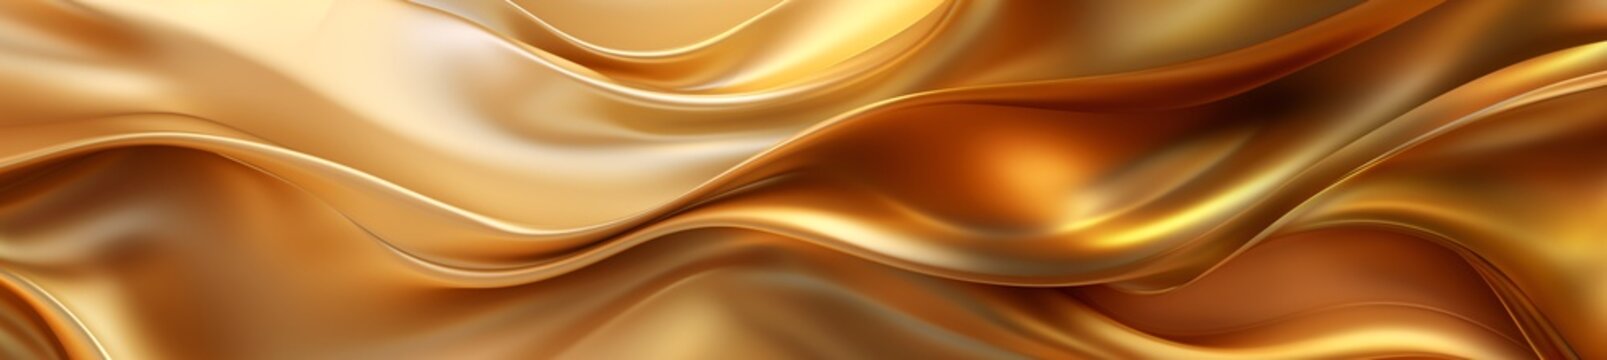 A long piece of gold or silk fabric with a shiny reflection, curved into soft waves. Flowing beautifully, luxury and elegant. Gold metal material. Top view.